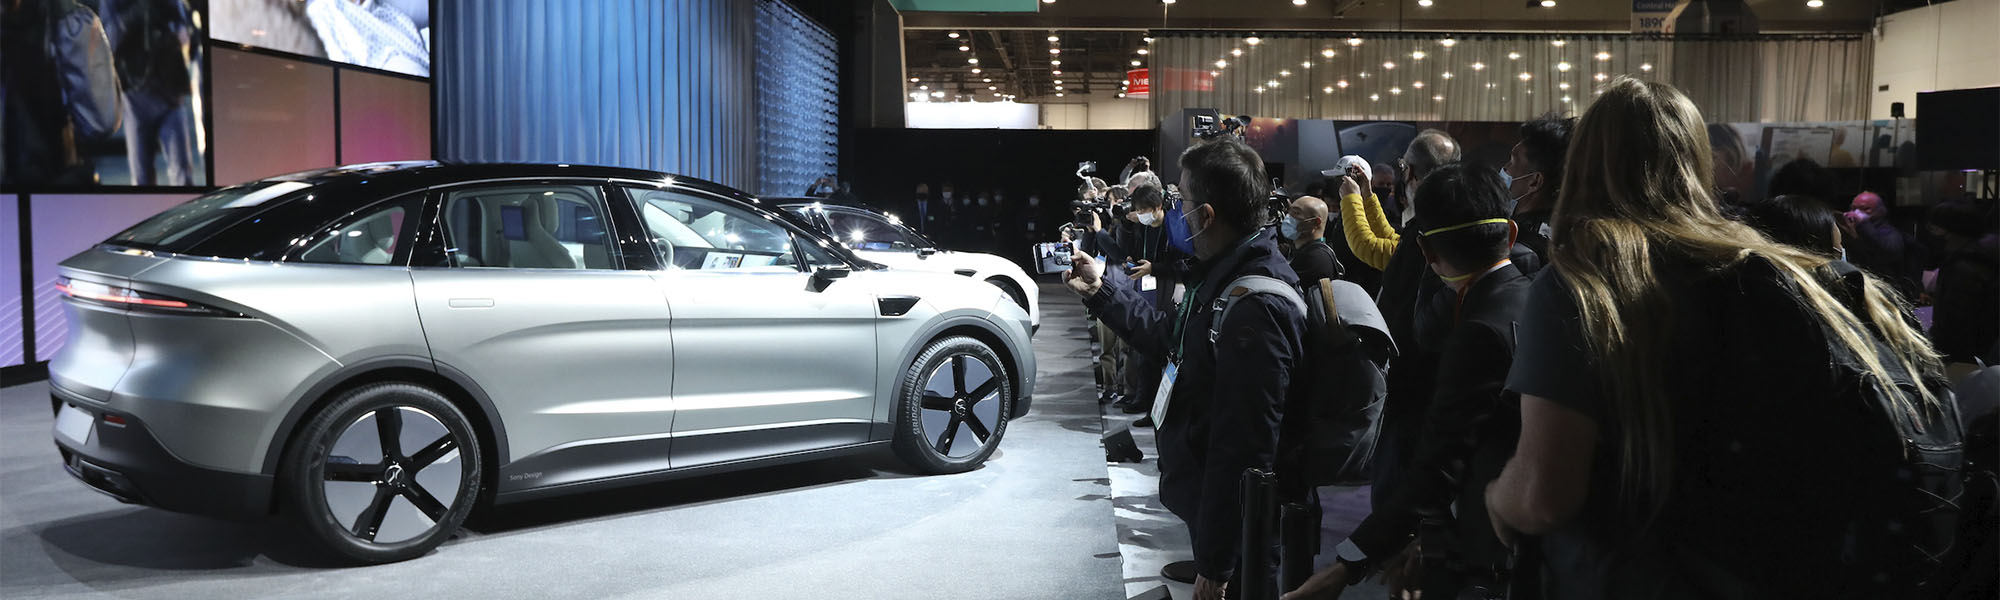 Here are our 5 favorite EVs at CES 2022